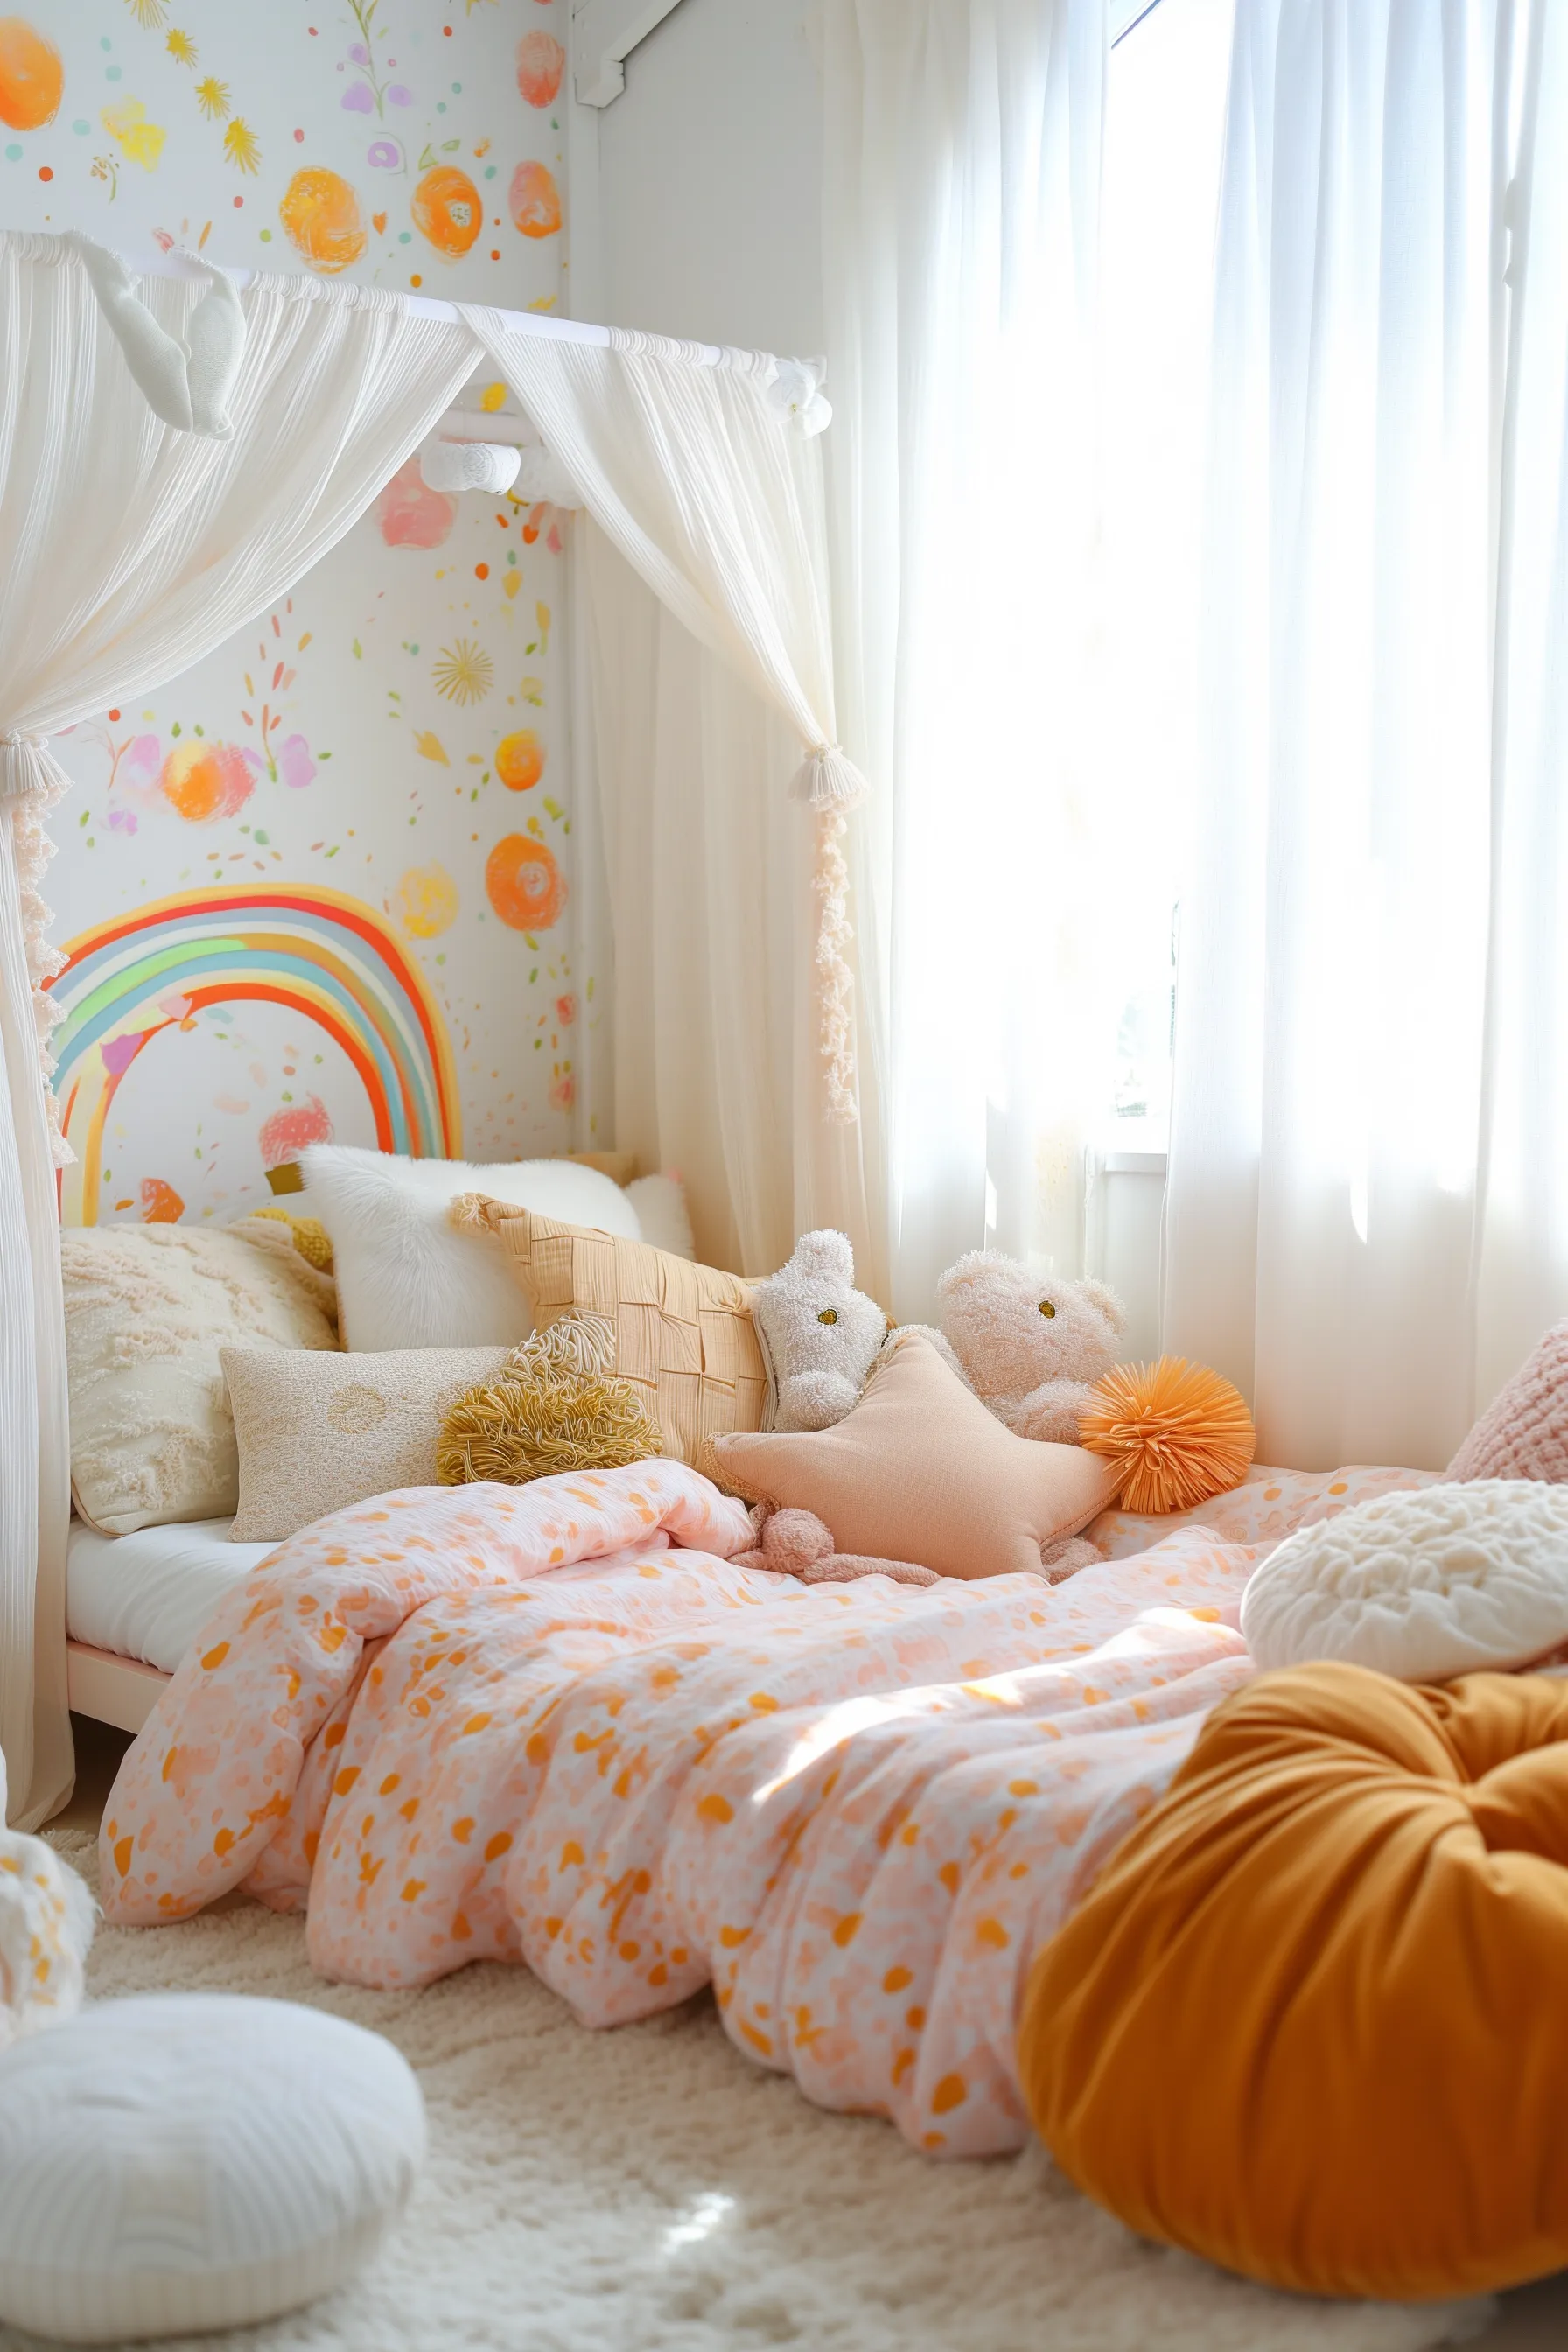 Orange, pink and white bedding with a rainbow accent wall